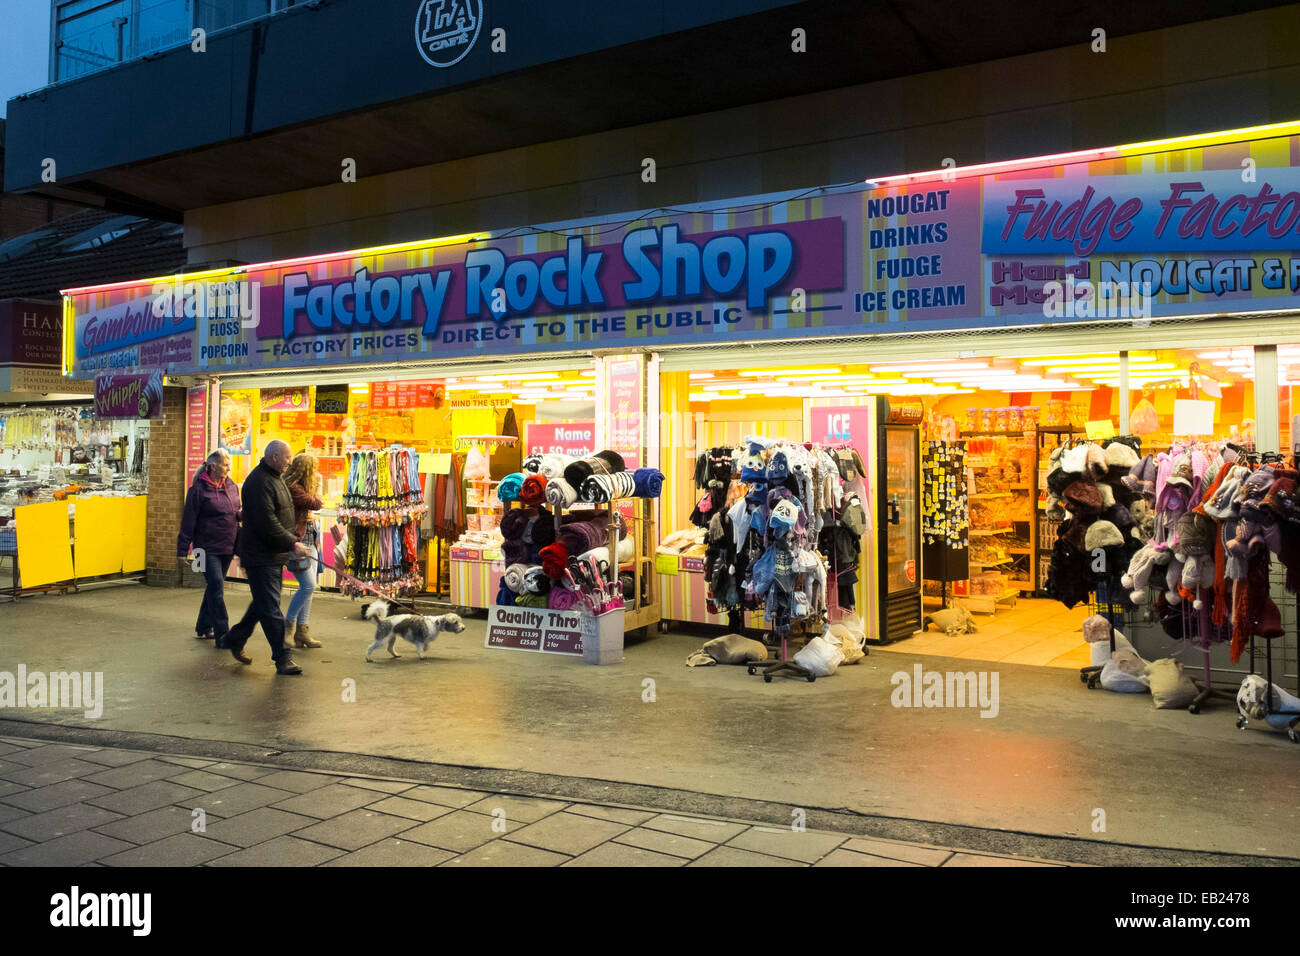 The Factory Rock Shop near the sea front in Skegness Stock Photo